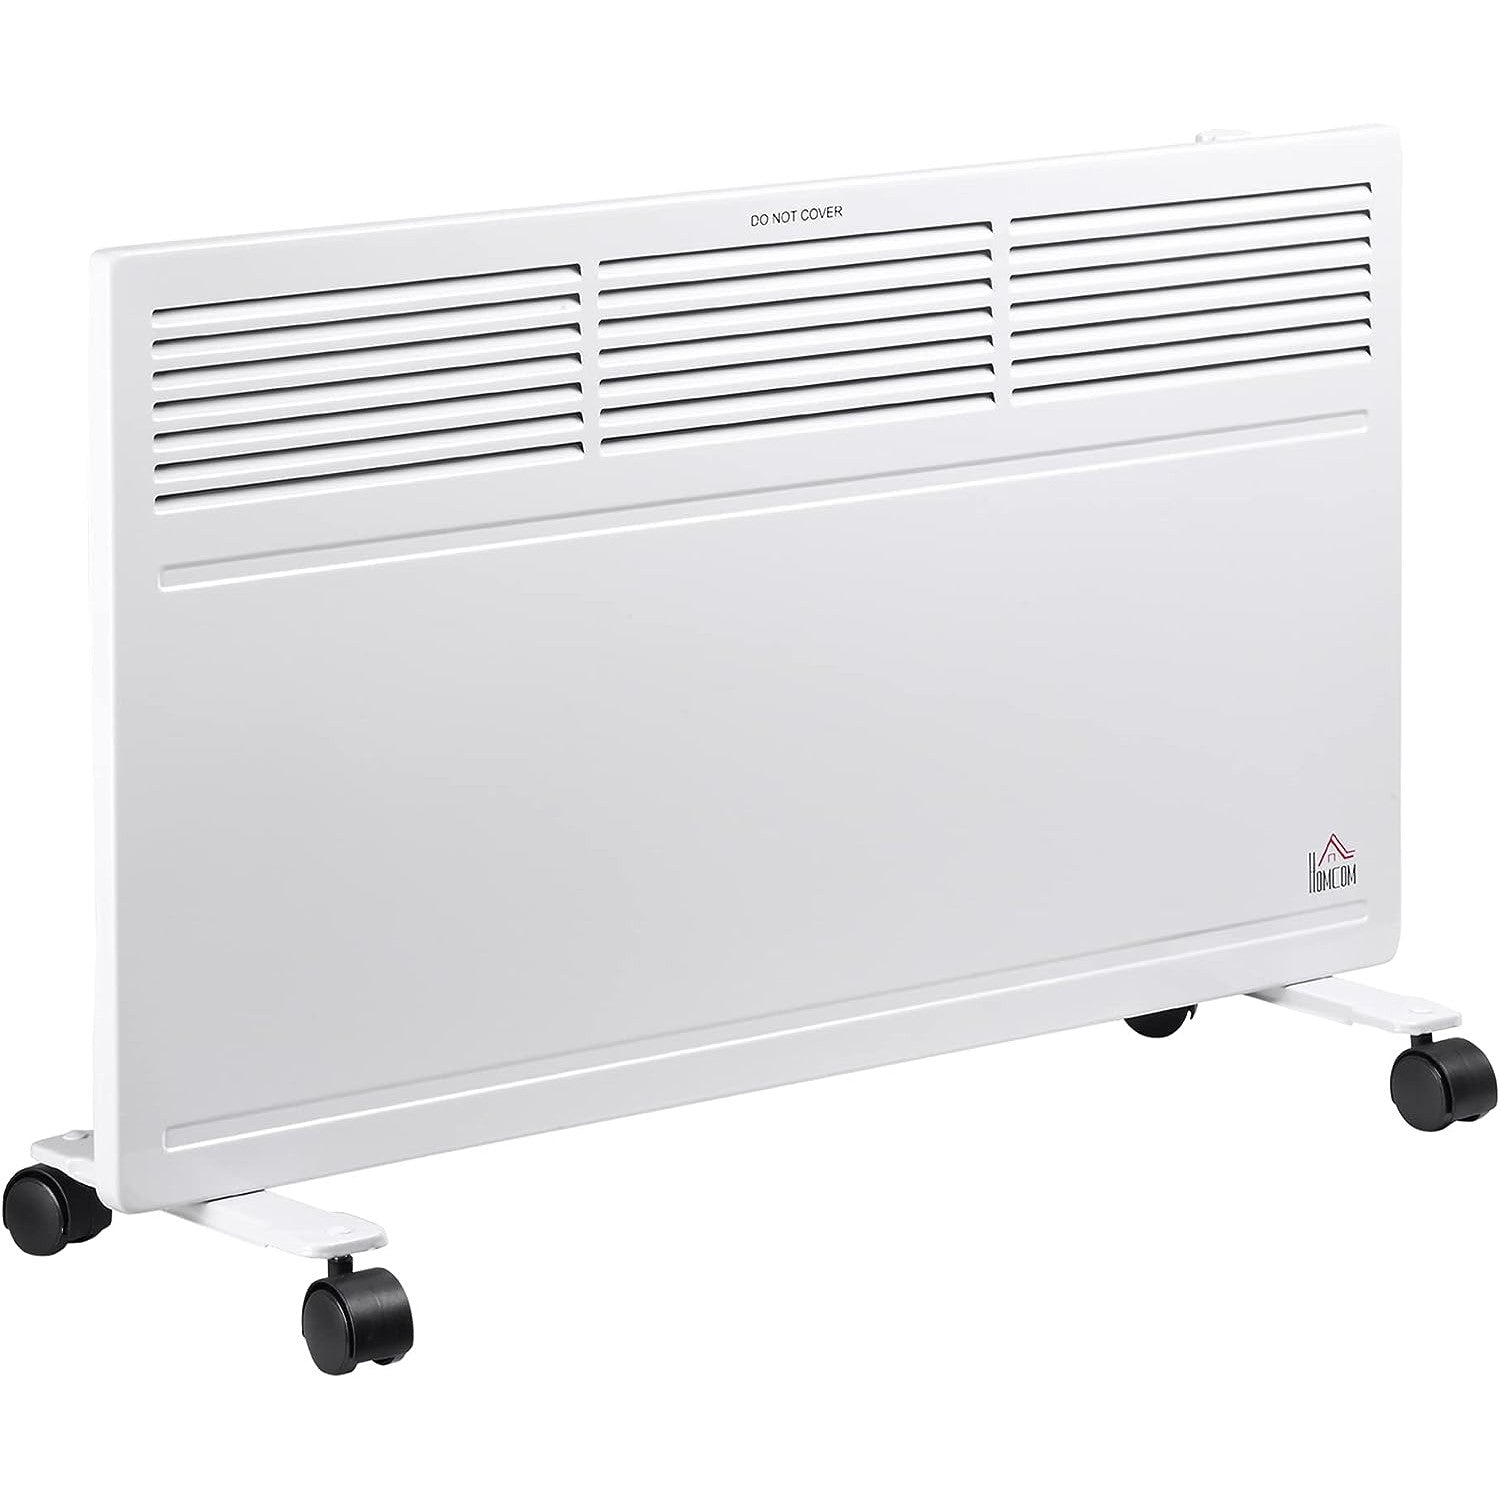 Maplin Freestanding / Wall-Mounted Convector Portable Radiator Heater with Adjustable Thermostat (White)